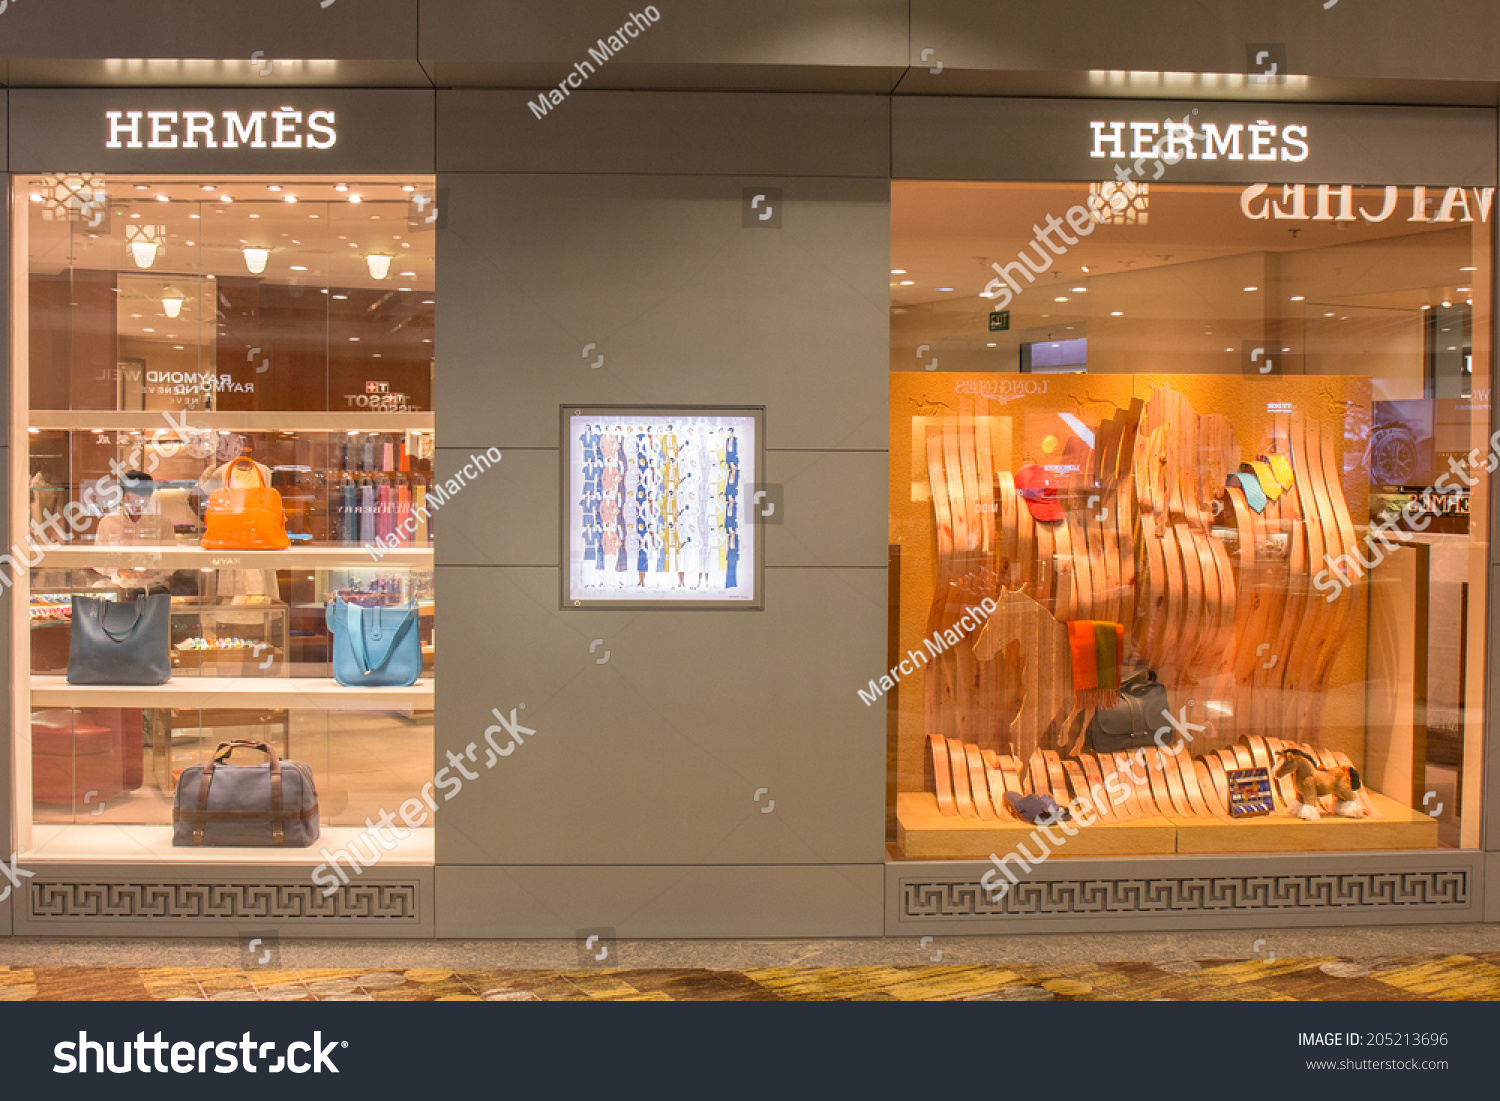 Singapore - June 20: Hermes Store In Changi Airport, Singapore On ...